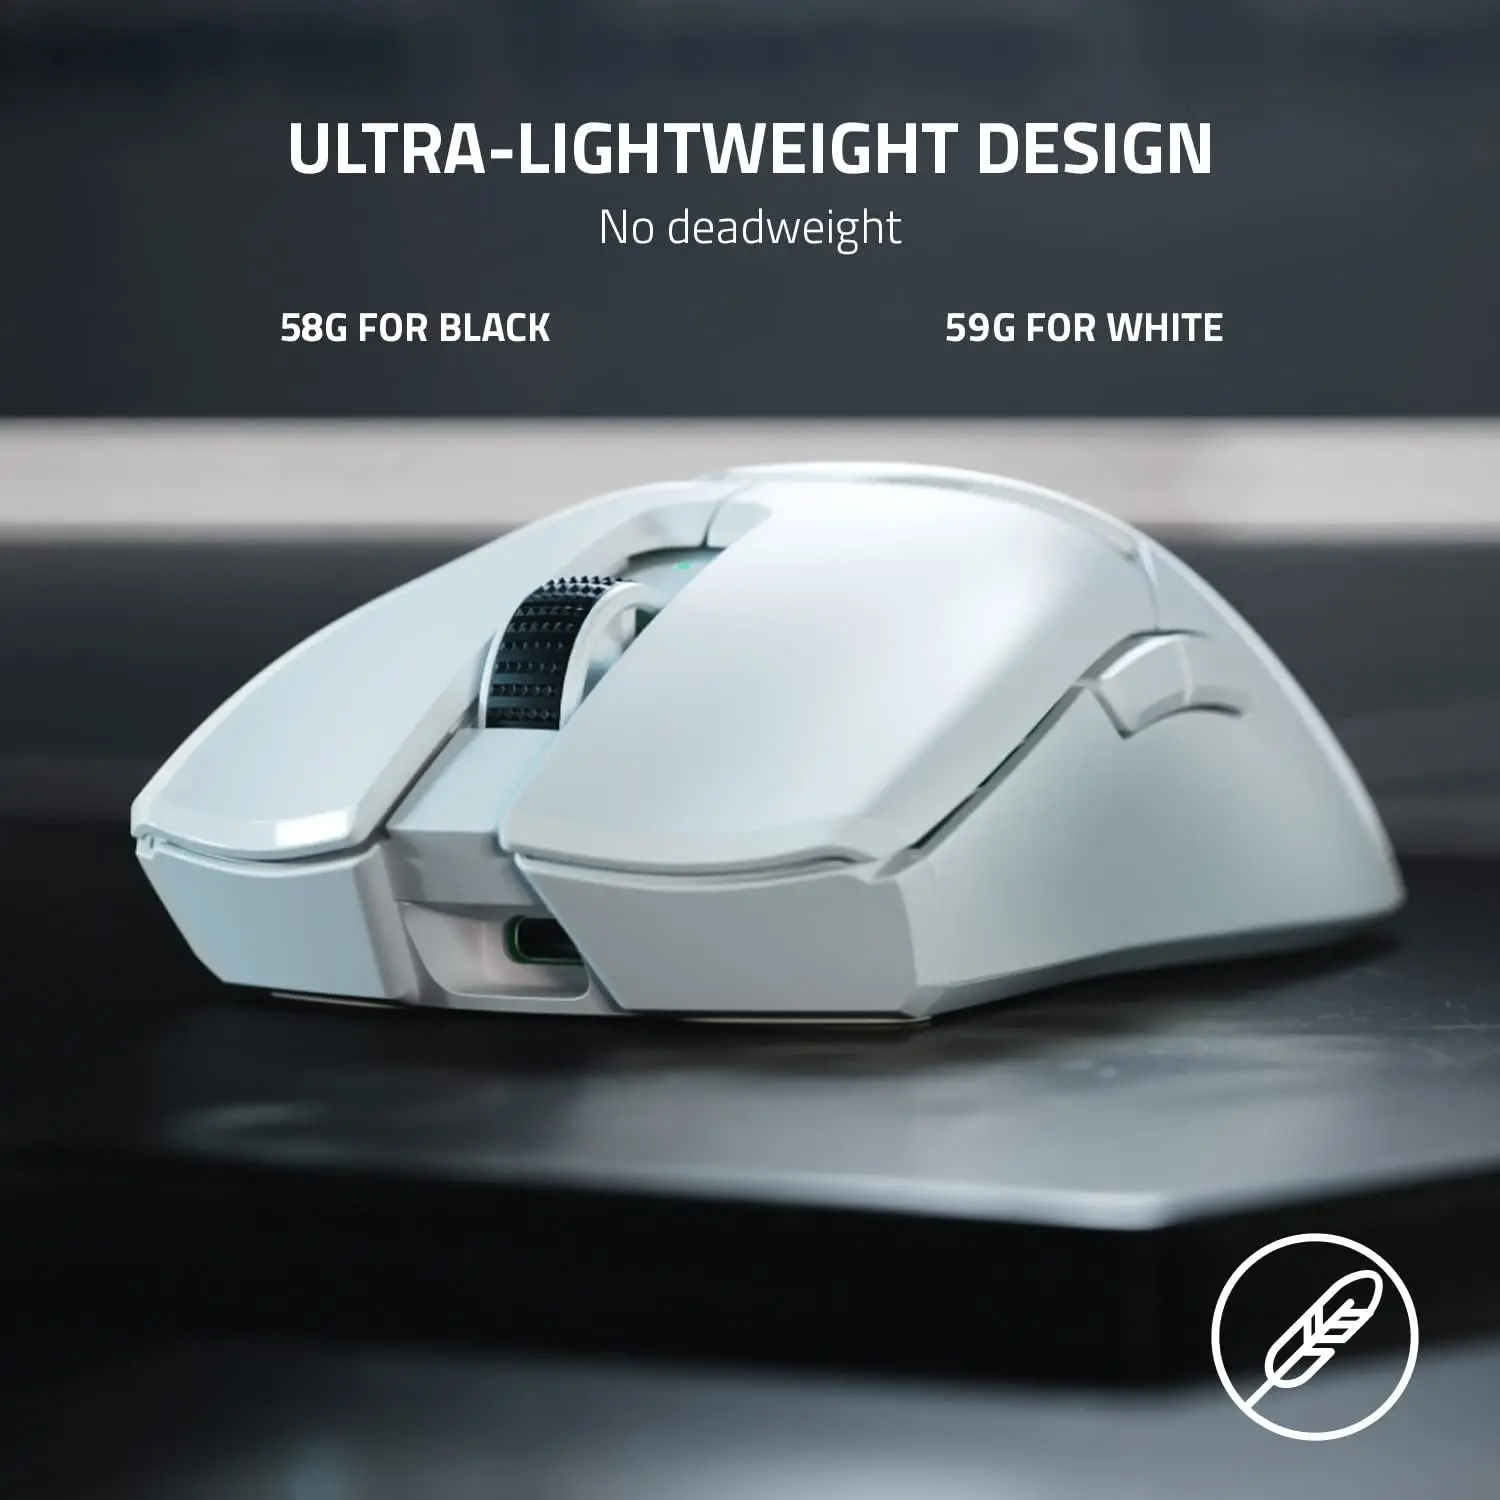 New Razer Viper Mini Wireless Signature Edition Mouse Lightweight 49g  magnesium alloy Hollowed out Two-handed